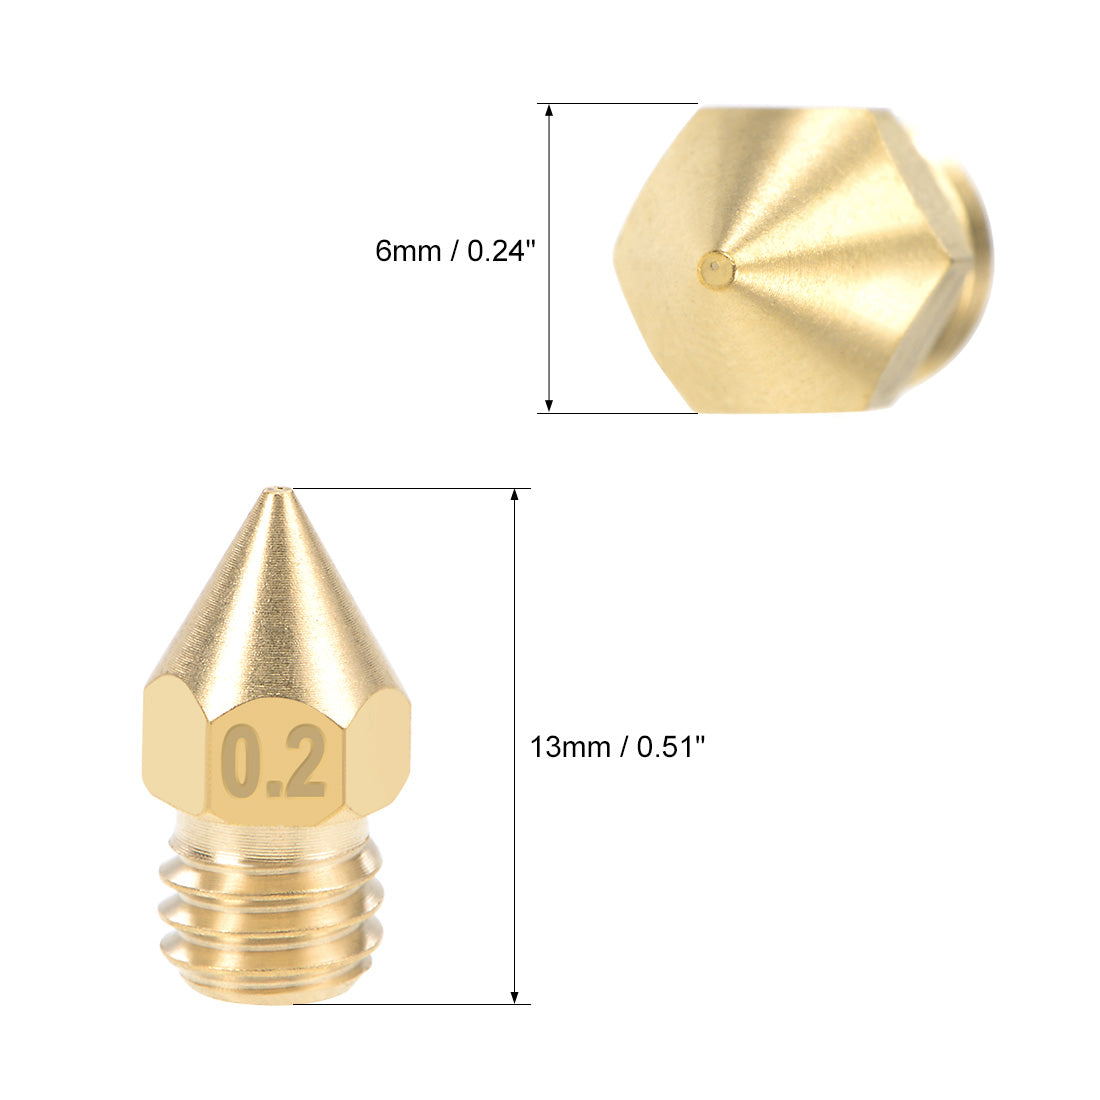 uxcell Uxcell 0.2mm 3D Printer Nozzle Head M6 Thread Replacement for MK8 1.75mm Extruder Print, Brass 10pcs